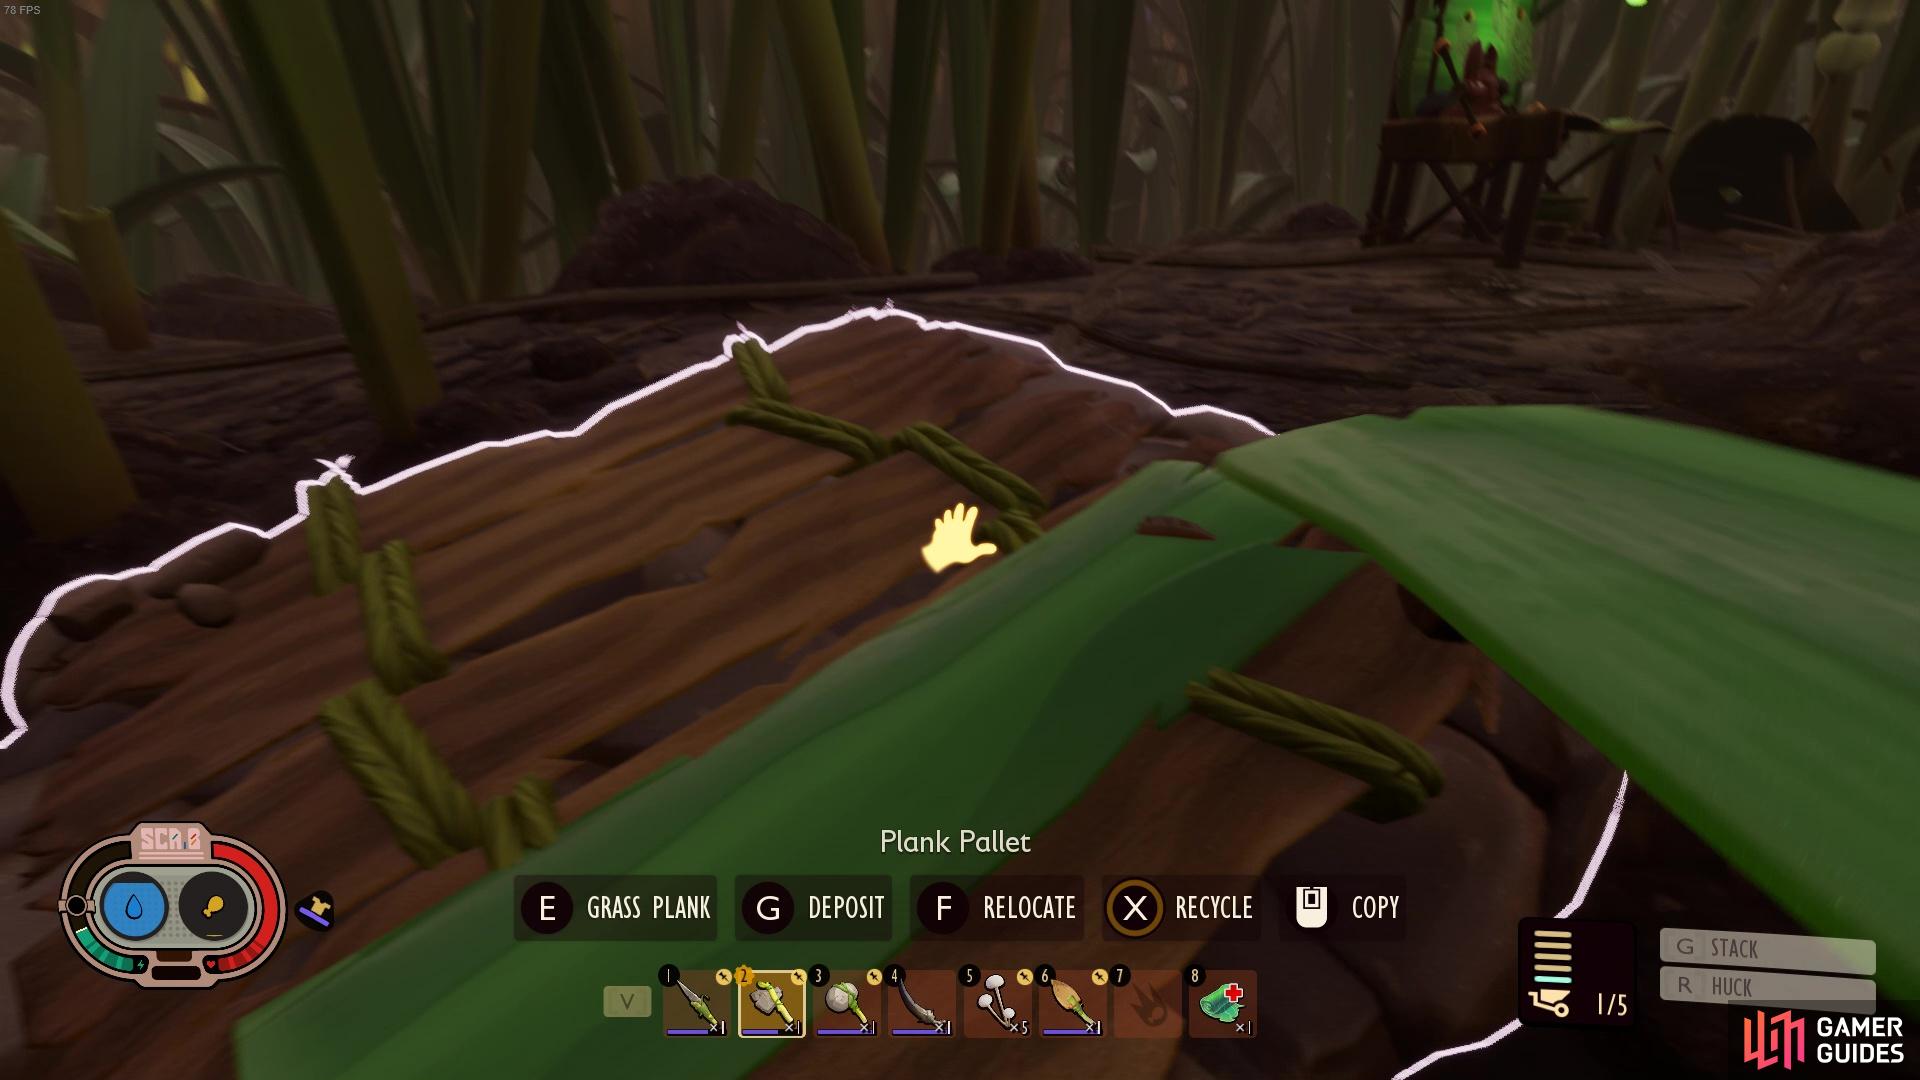 The Plank Pallet can store grass planks!